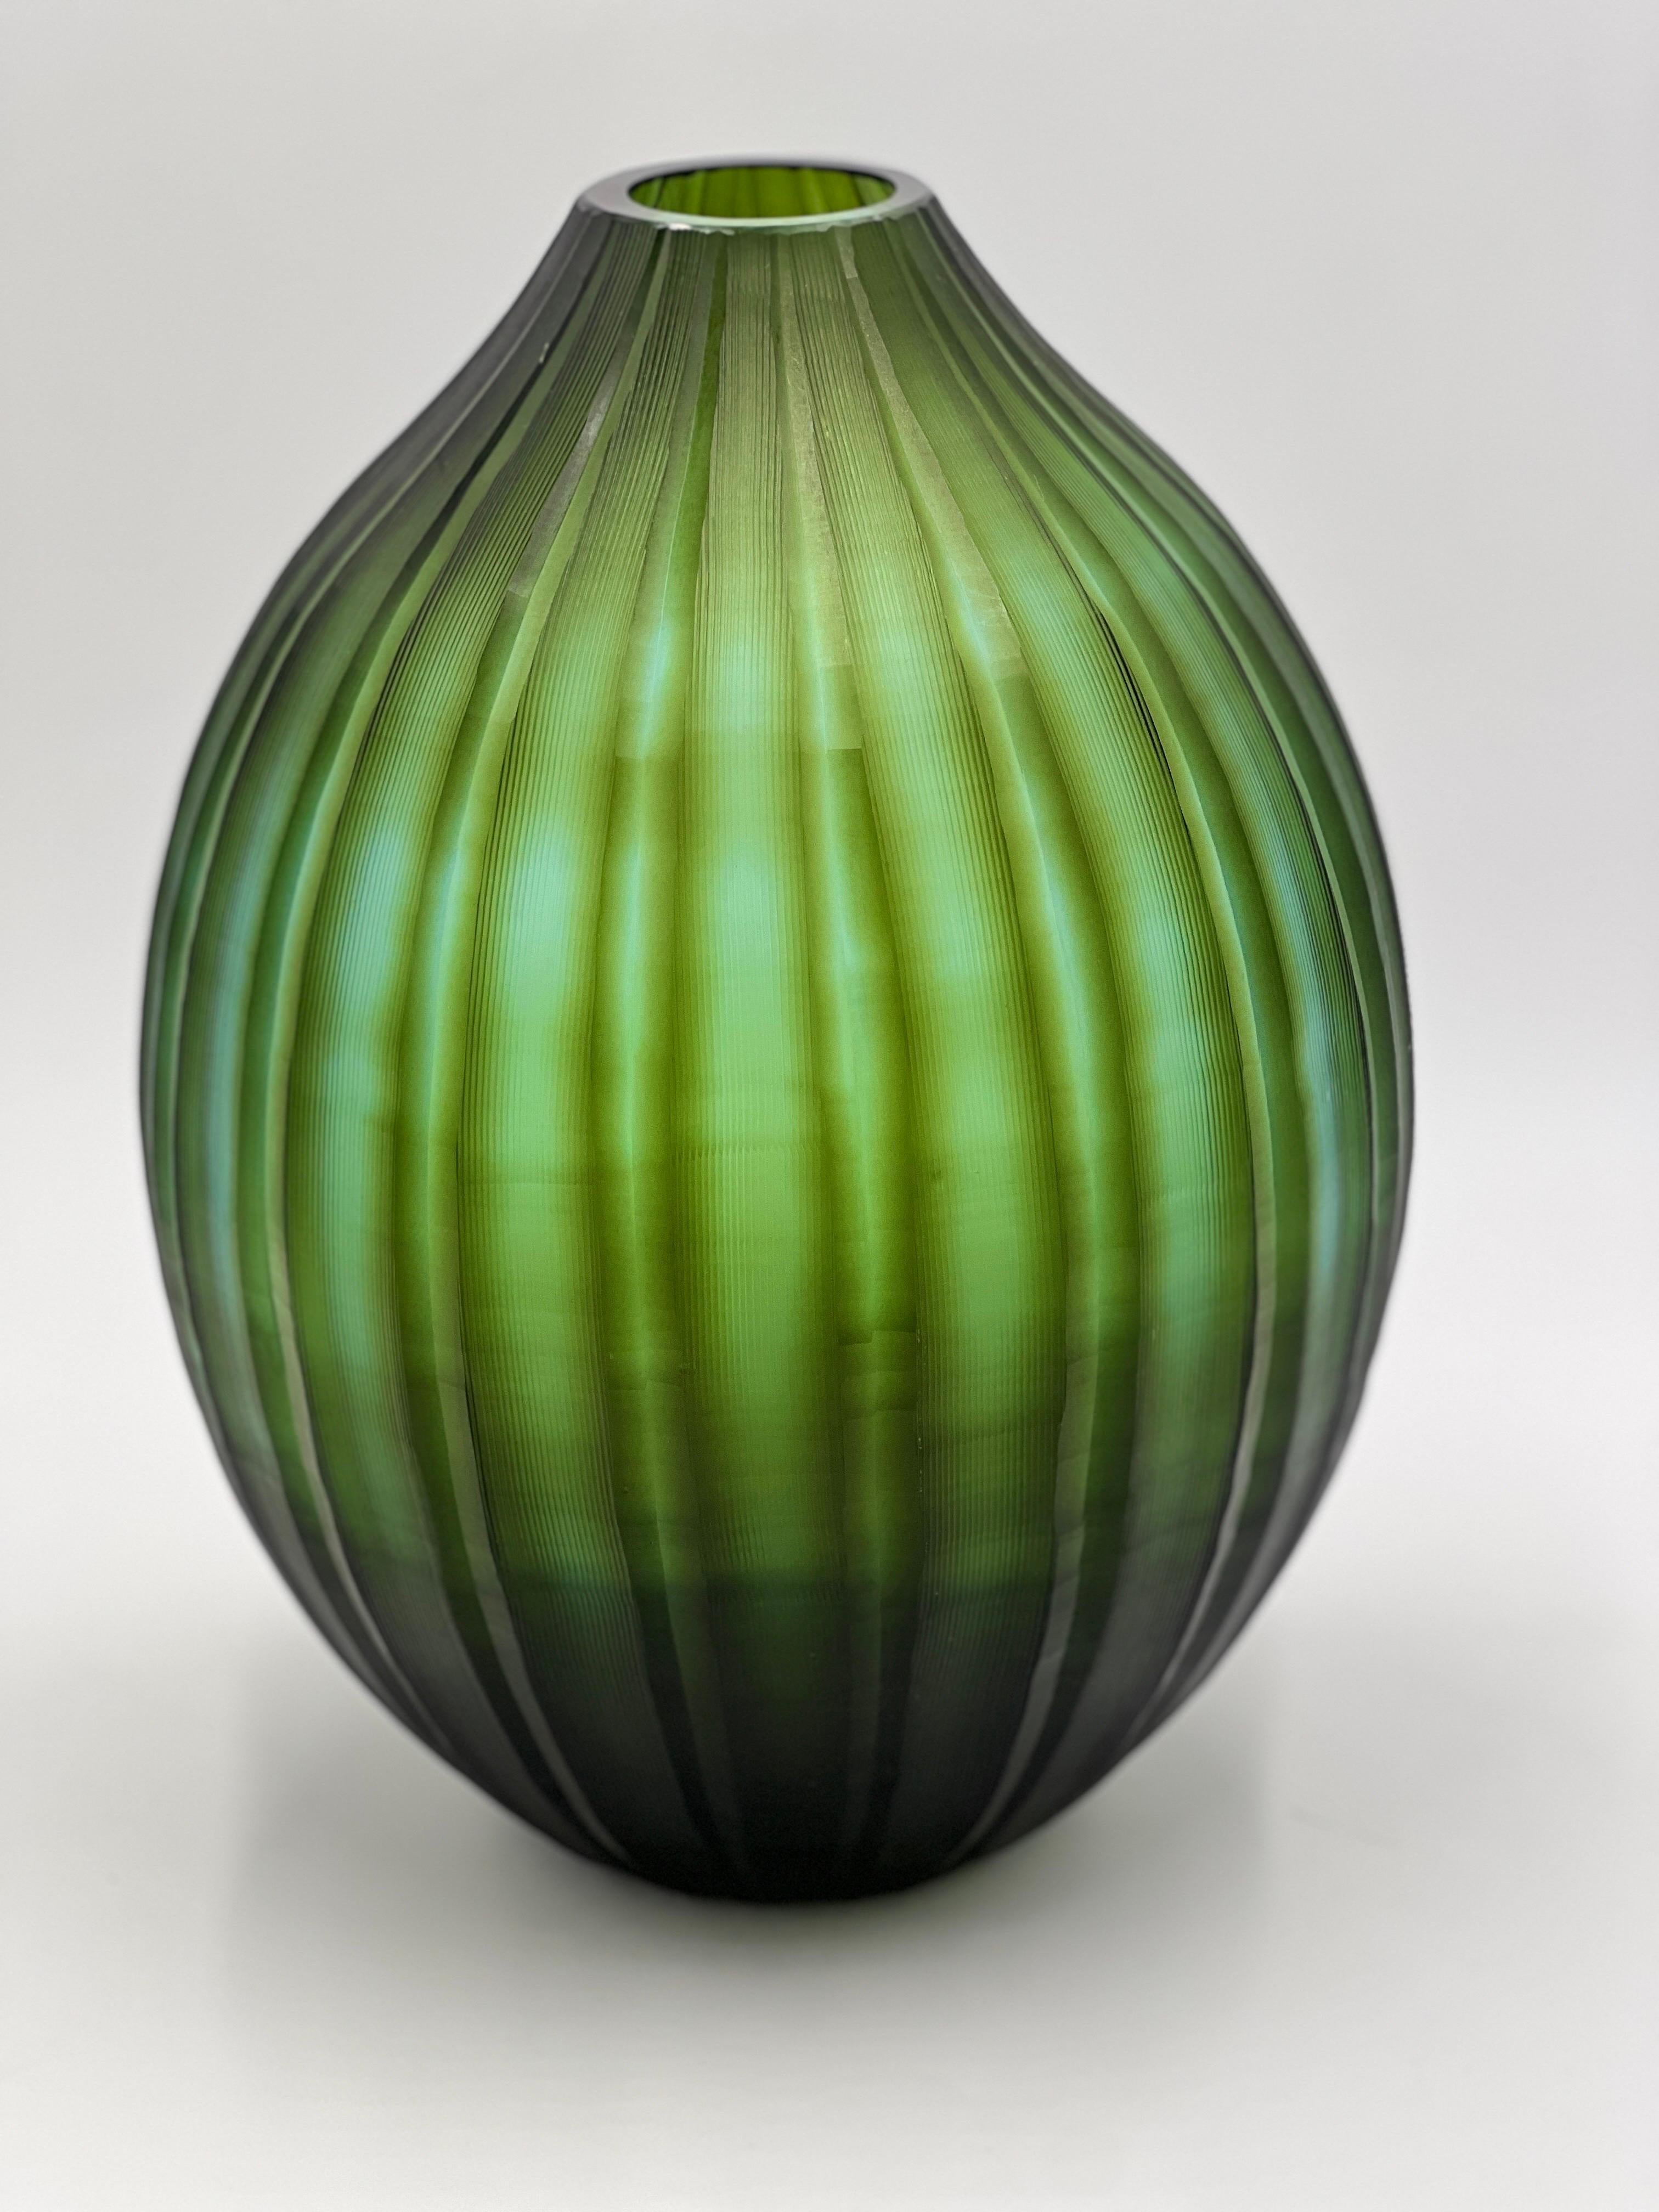 Carlo Scarpa (Italian, 1906-1978). This vase is extremely high quality, heavy and well sculptured. While it appears unsigned I have a strong confidence this piece is by Carlo Scarpa, but it is being sold as attributed to, circa 1940.